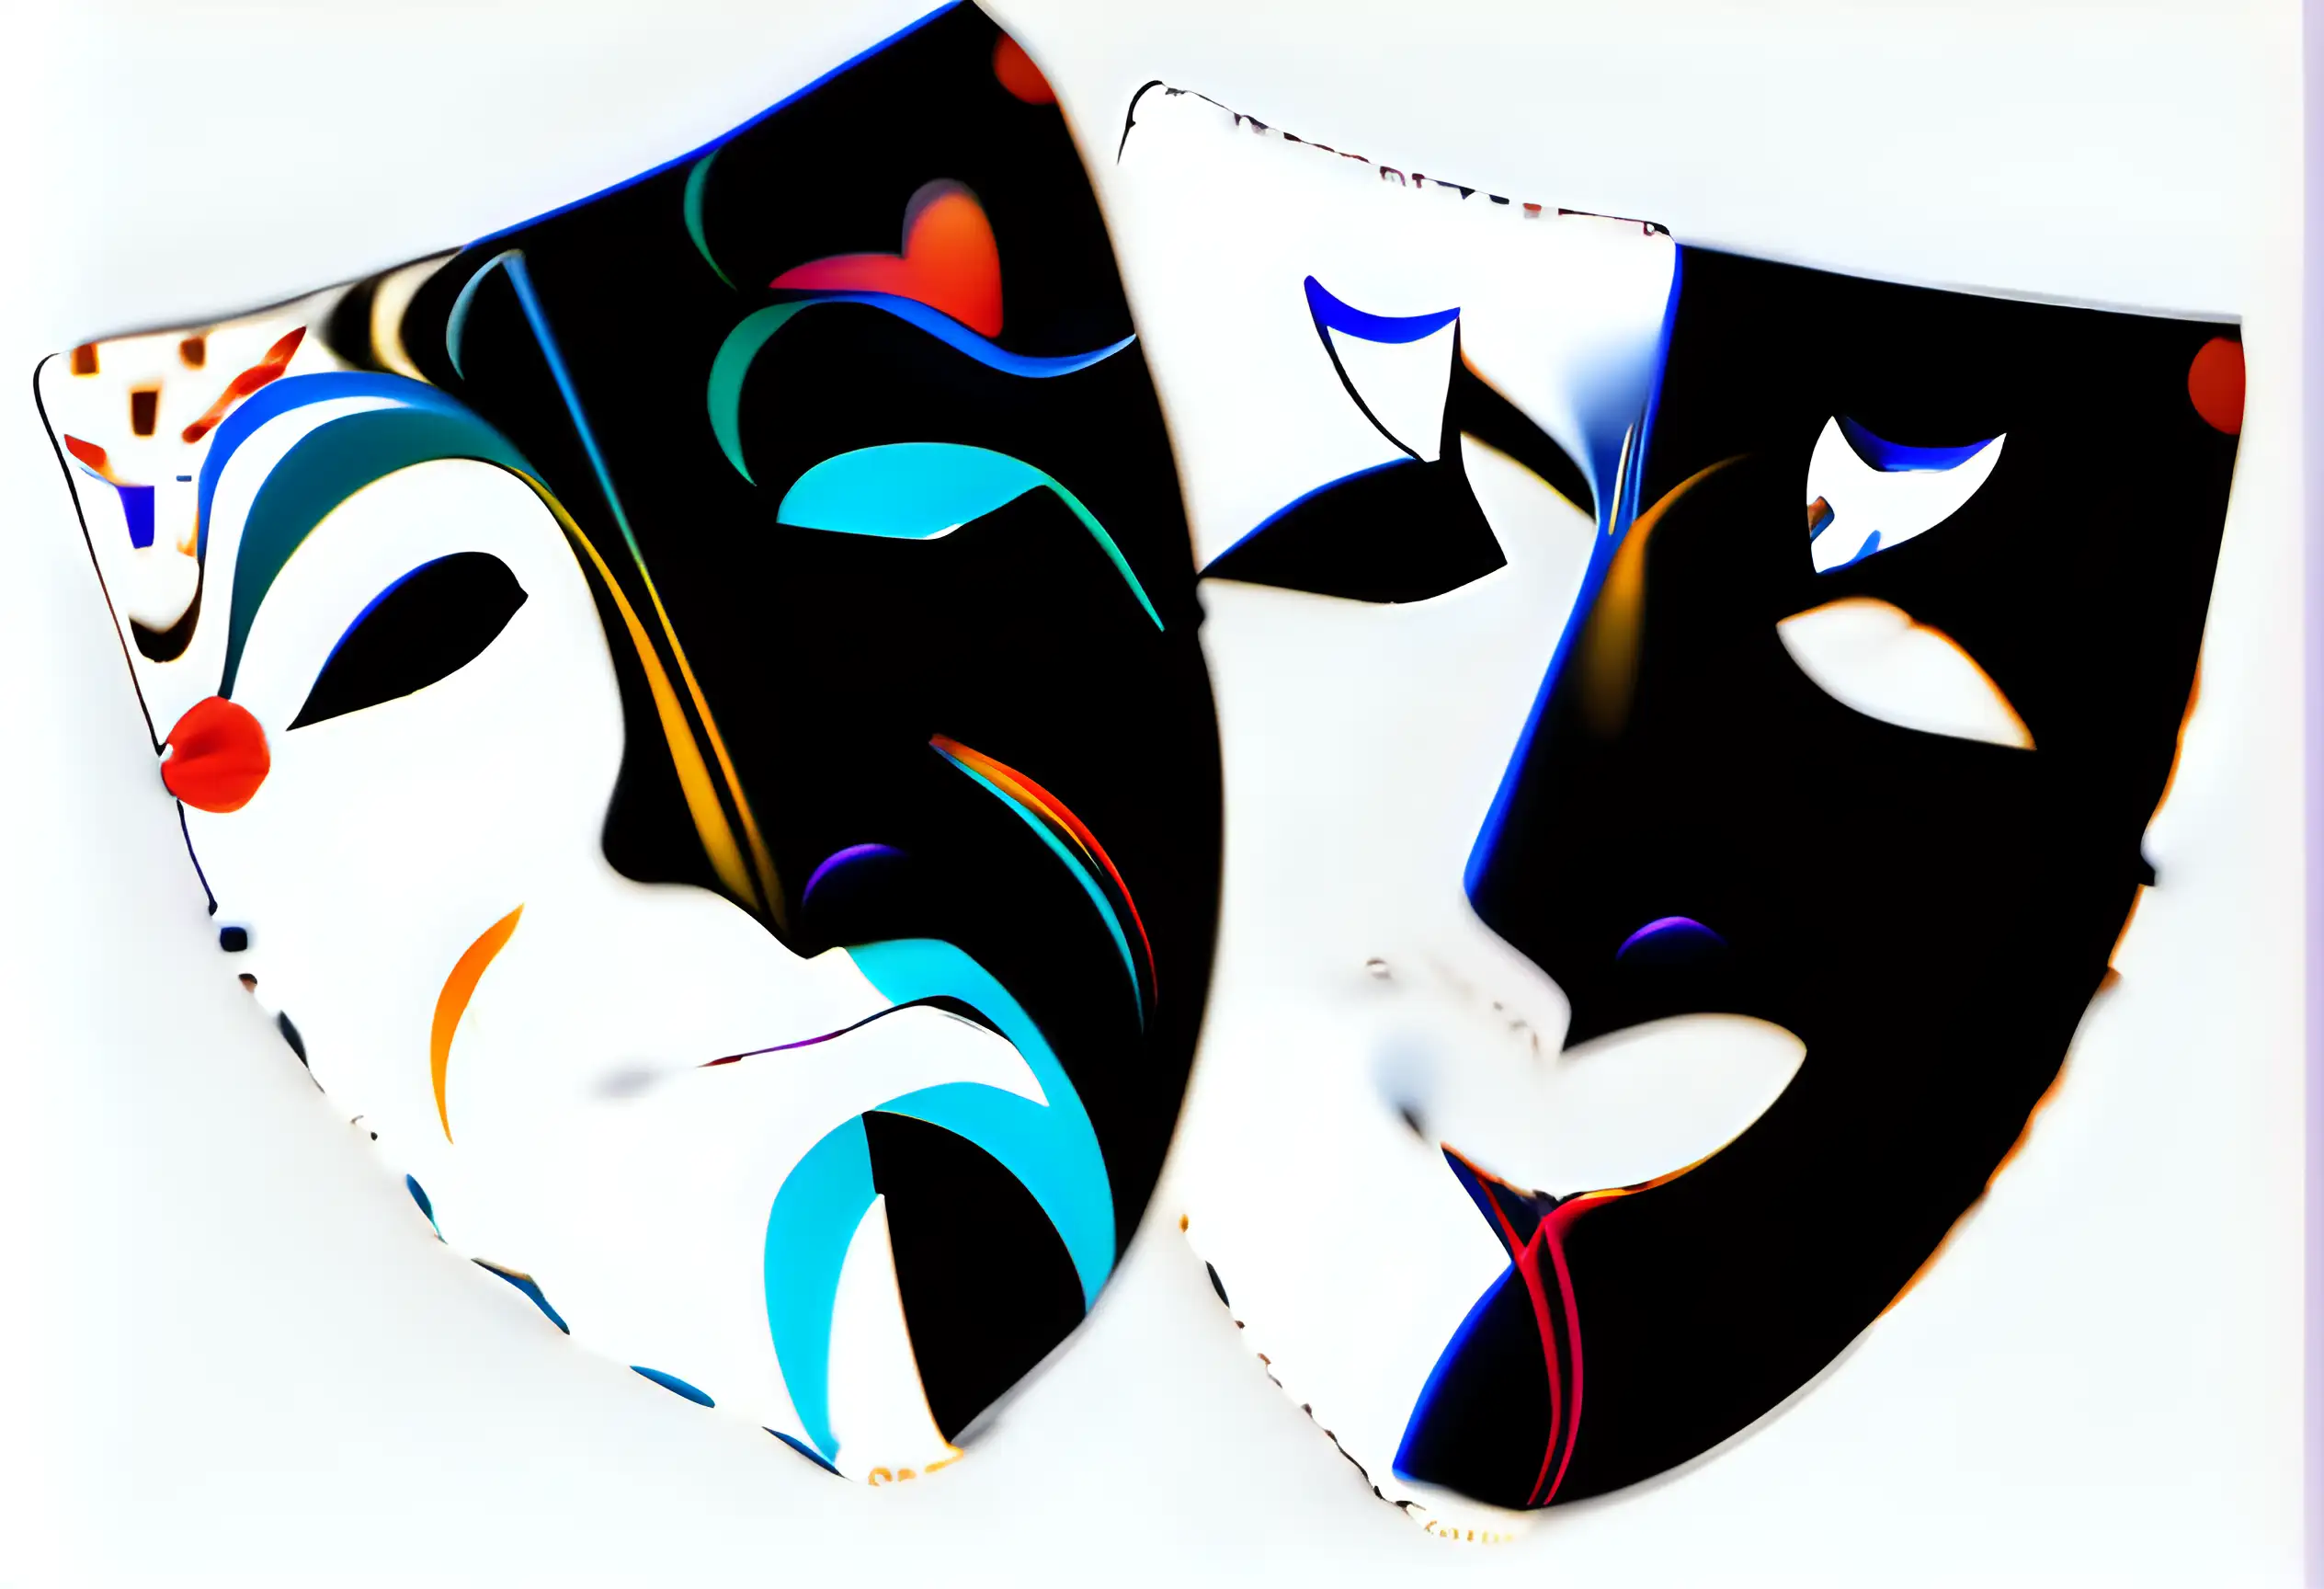 please give me a vibrant colorful ethnic and whimsical version of the Greek tragedy masks used to symbolize acting using dark blue, bright reds, sunset orange  and make the faces, male, female and heart shaped